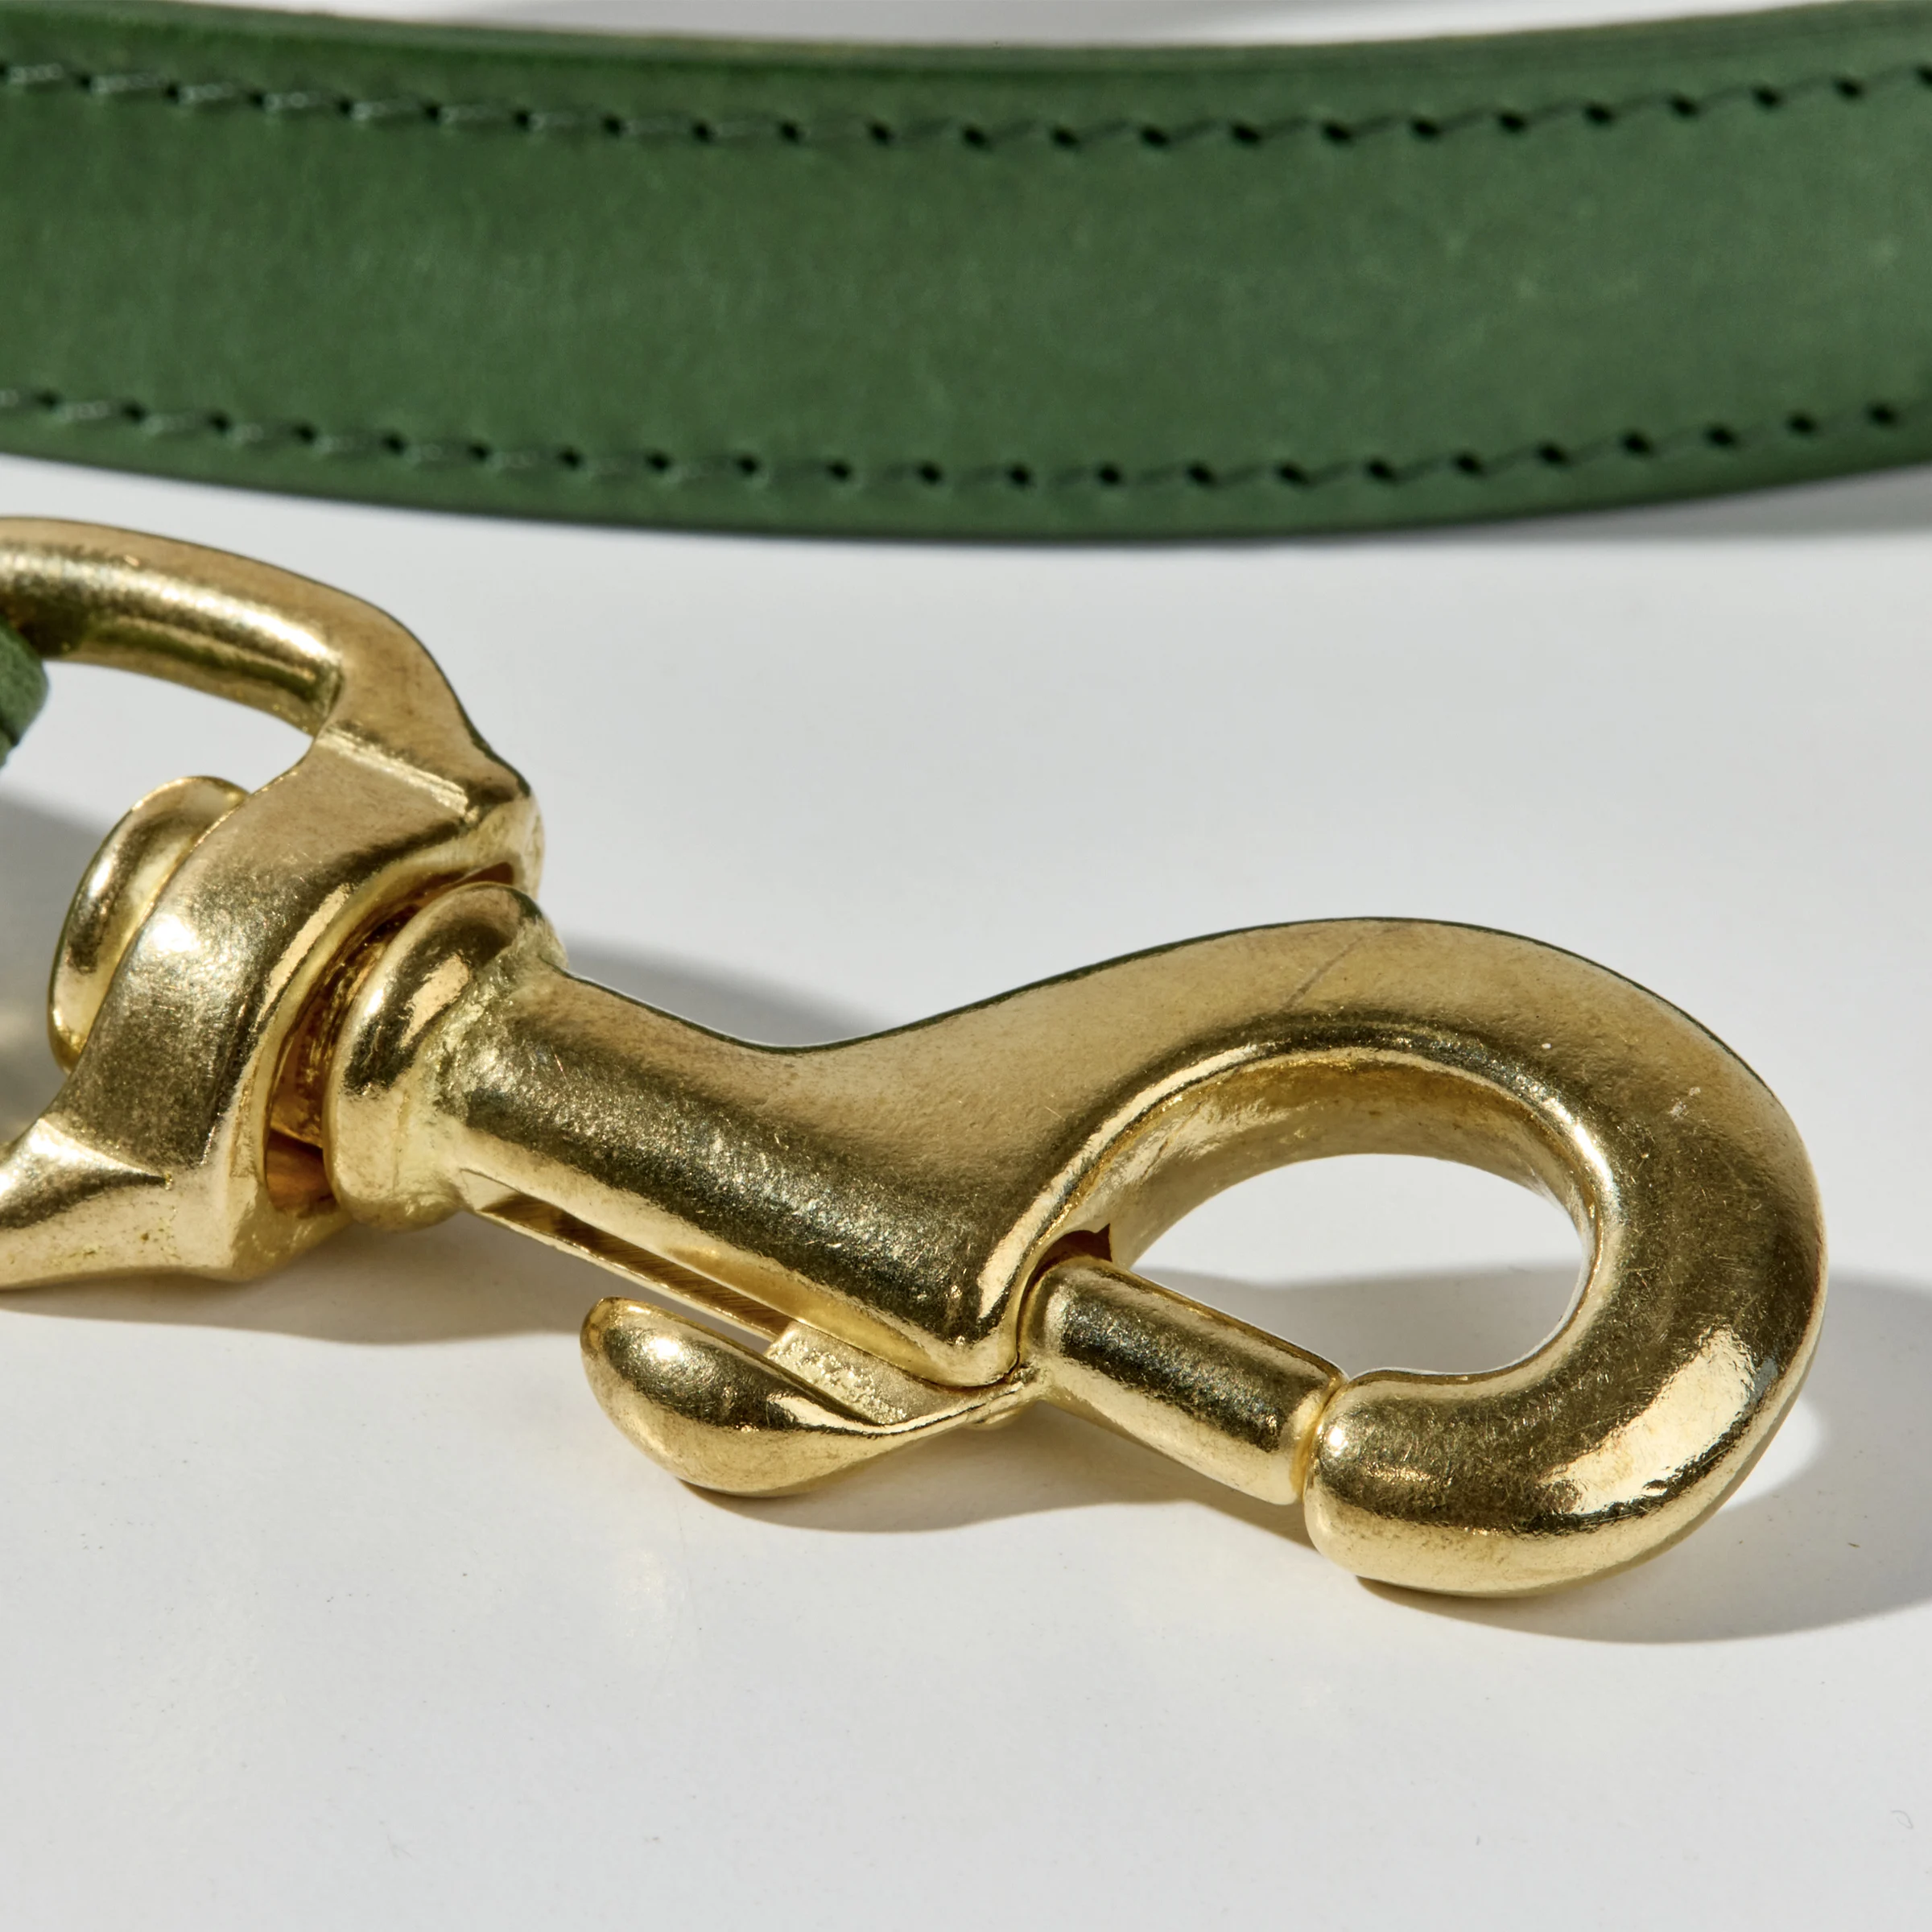 360° trigger hook – 360° solid brass trigger hook to for easy attachment to either a harness or collar.